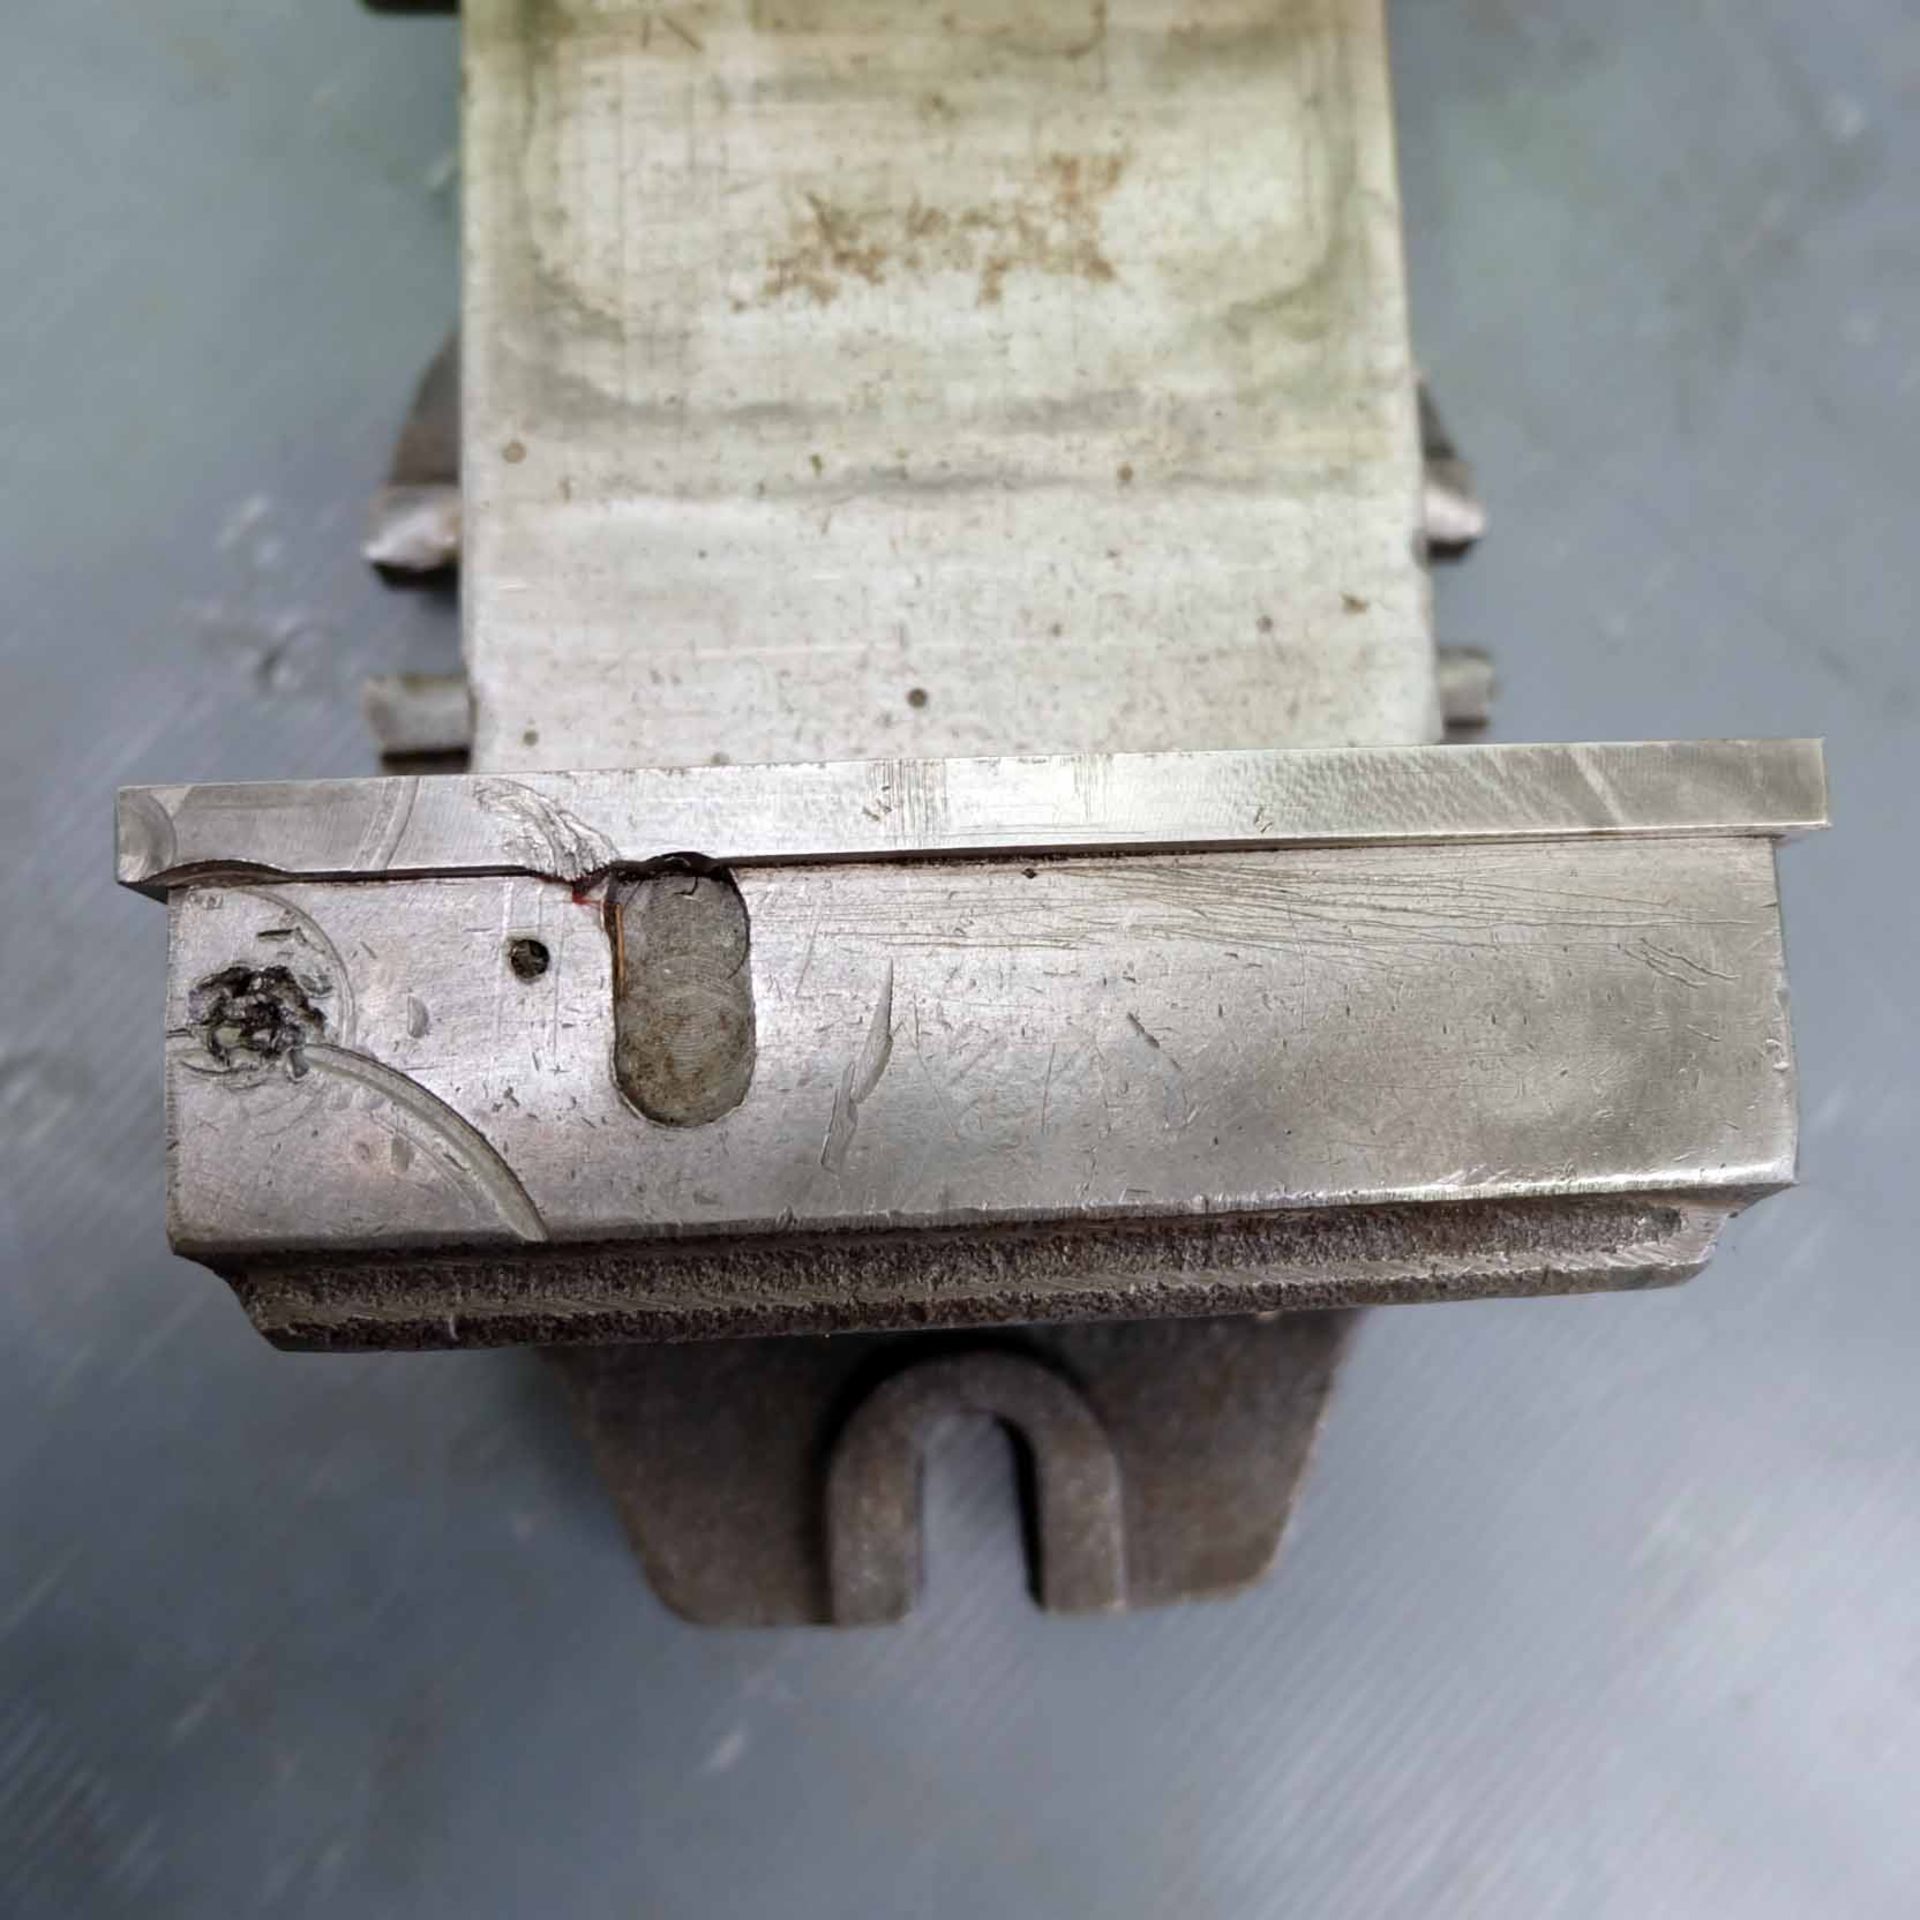 6" Machine Vice. Jaw Width 6". Jaw Depth 1 3/4". Max Opening 4 3/8". Overall Height 4 1/4". - Image 6 of 6